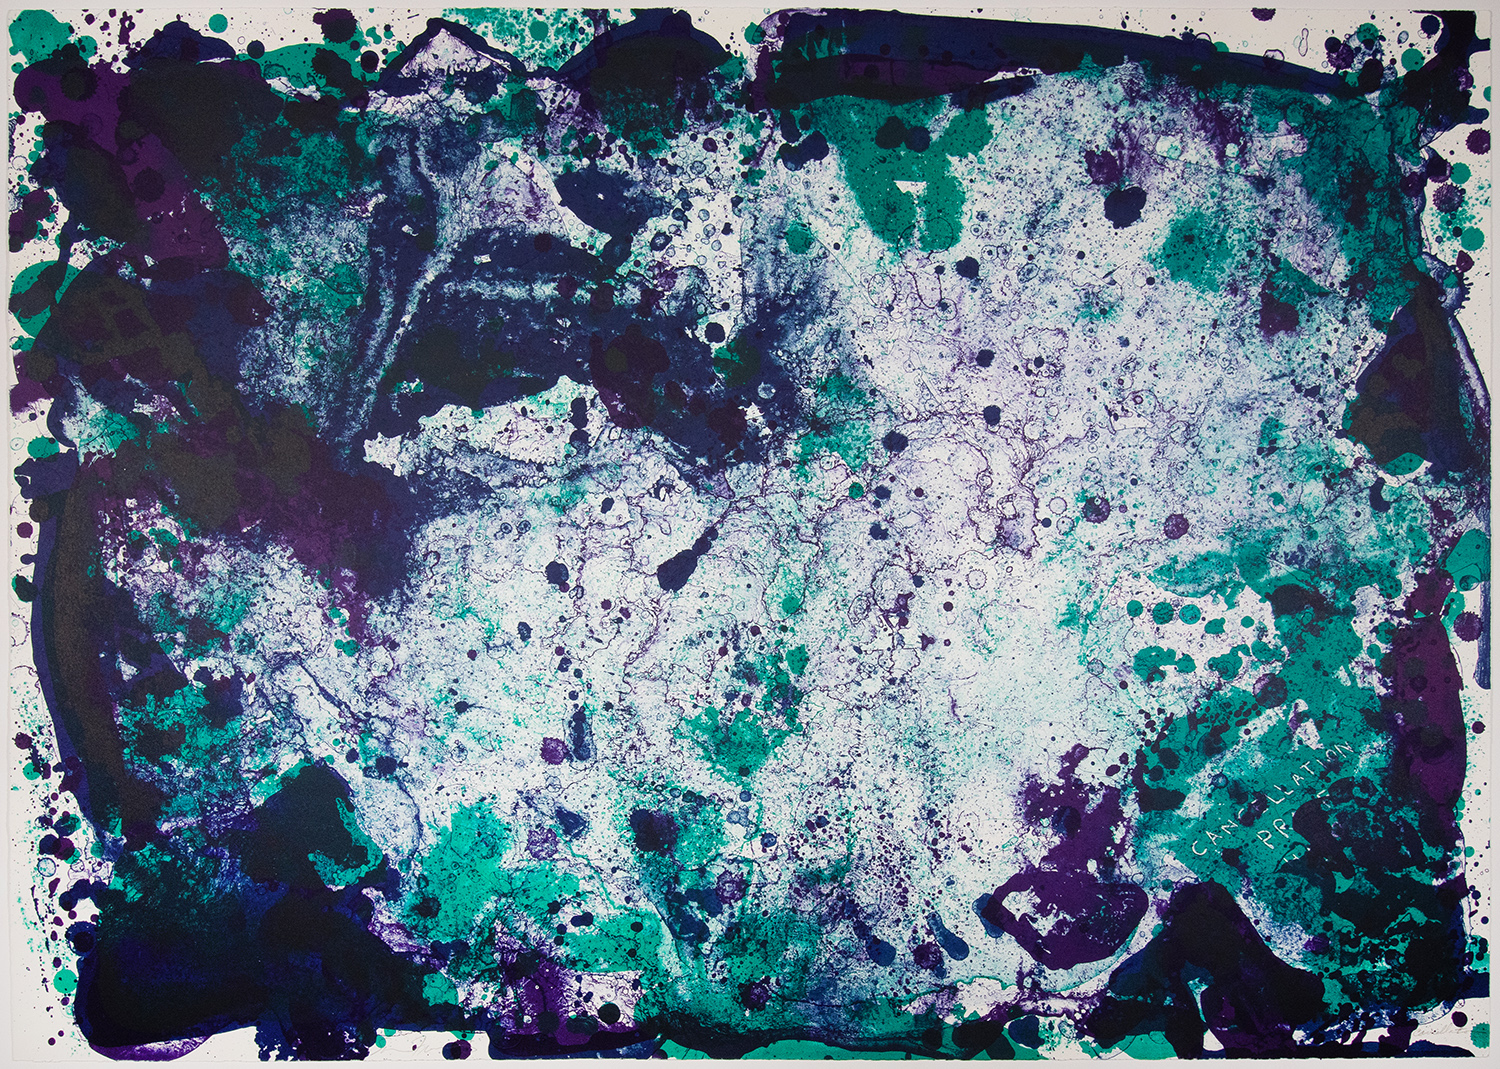 Sam Francis special proof of heavily covered abstraction in colorful green and purple ink